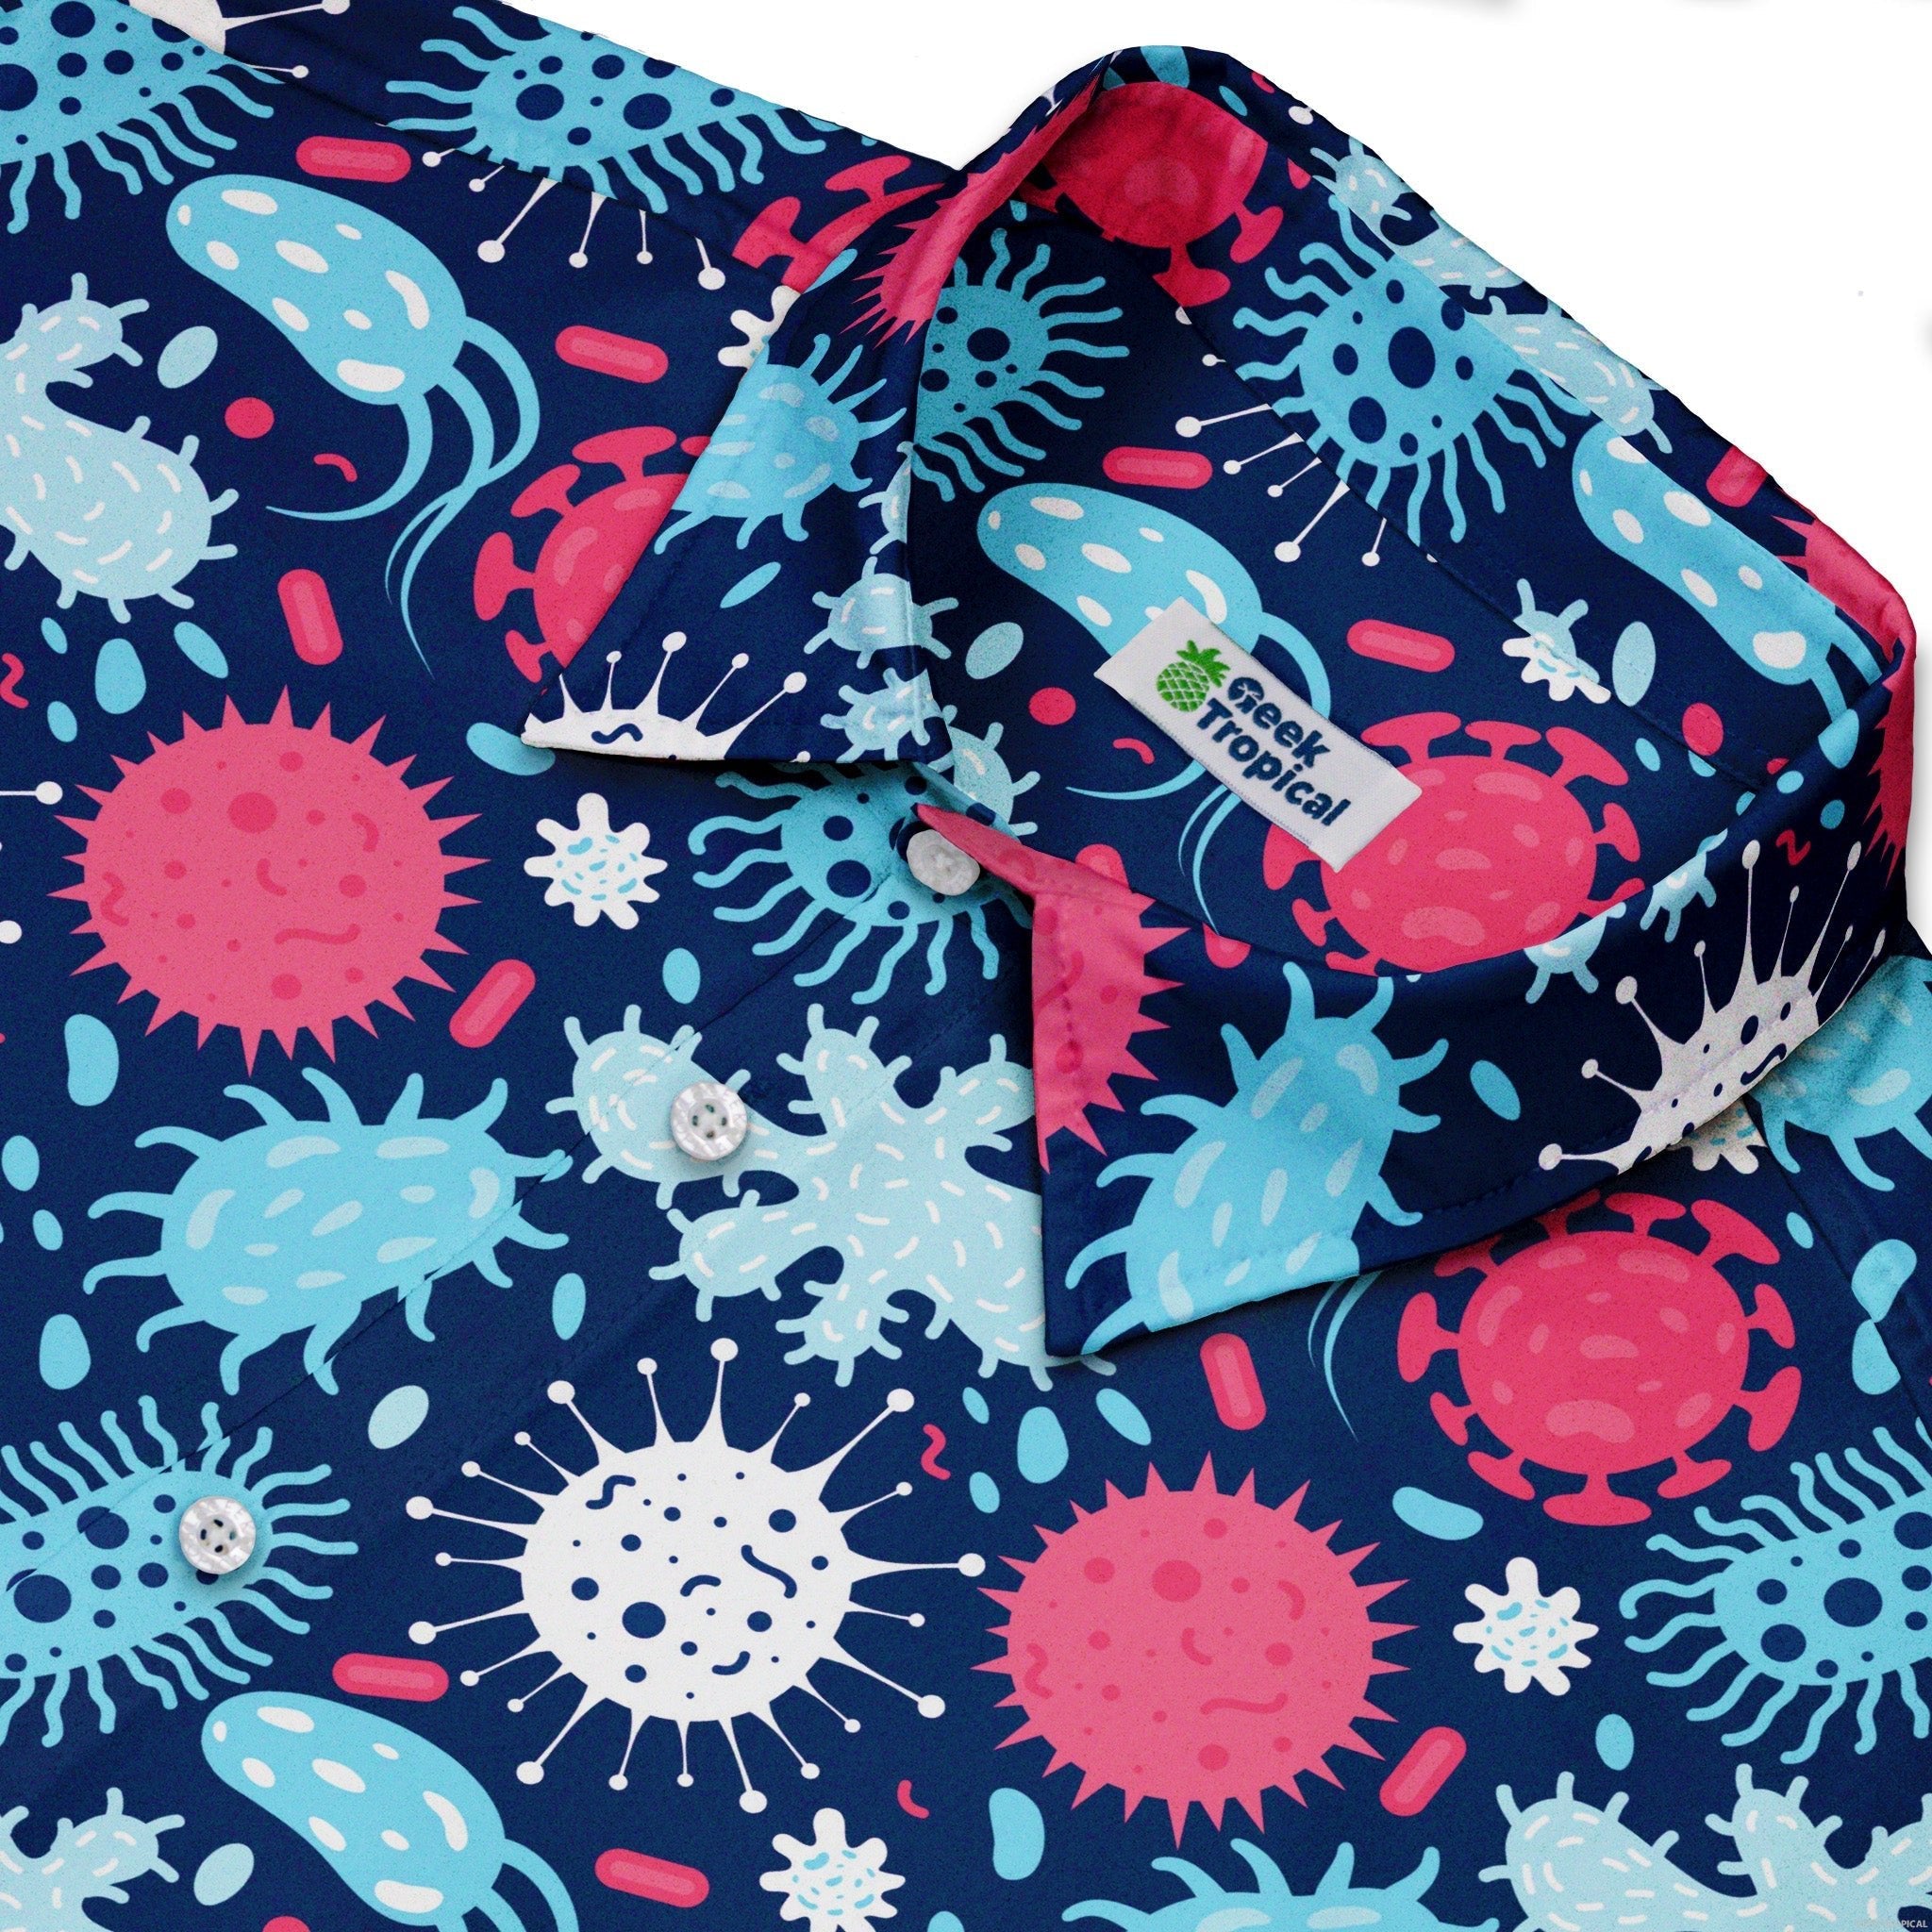 Microscopic Collection Blue Science Biology Button Up Shirt - adult sizing - Maximalist Patterns - science print